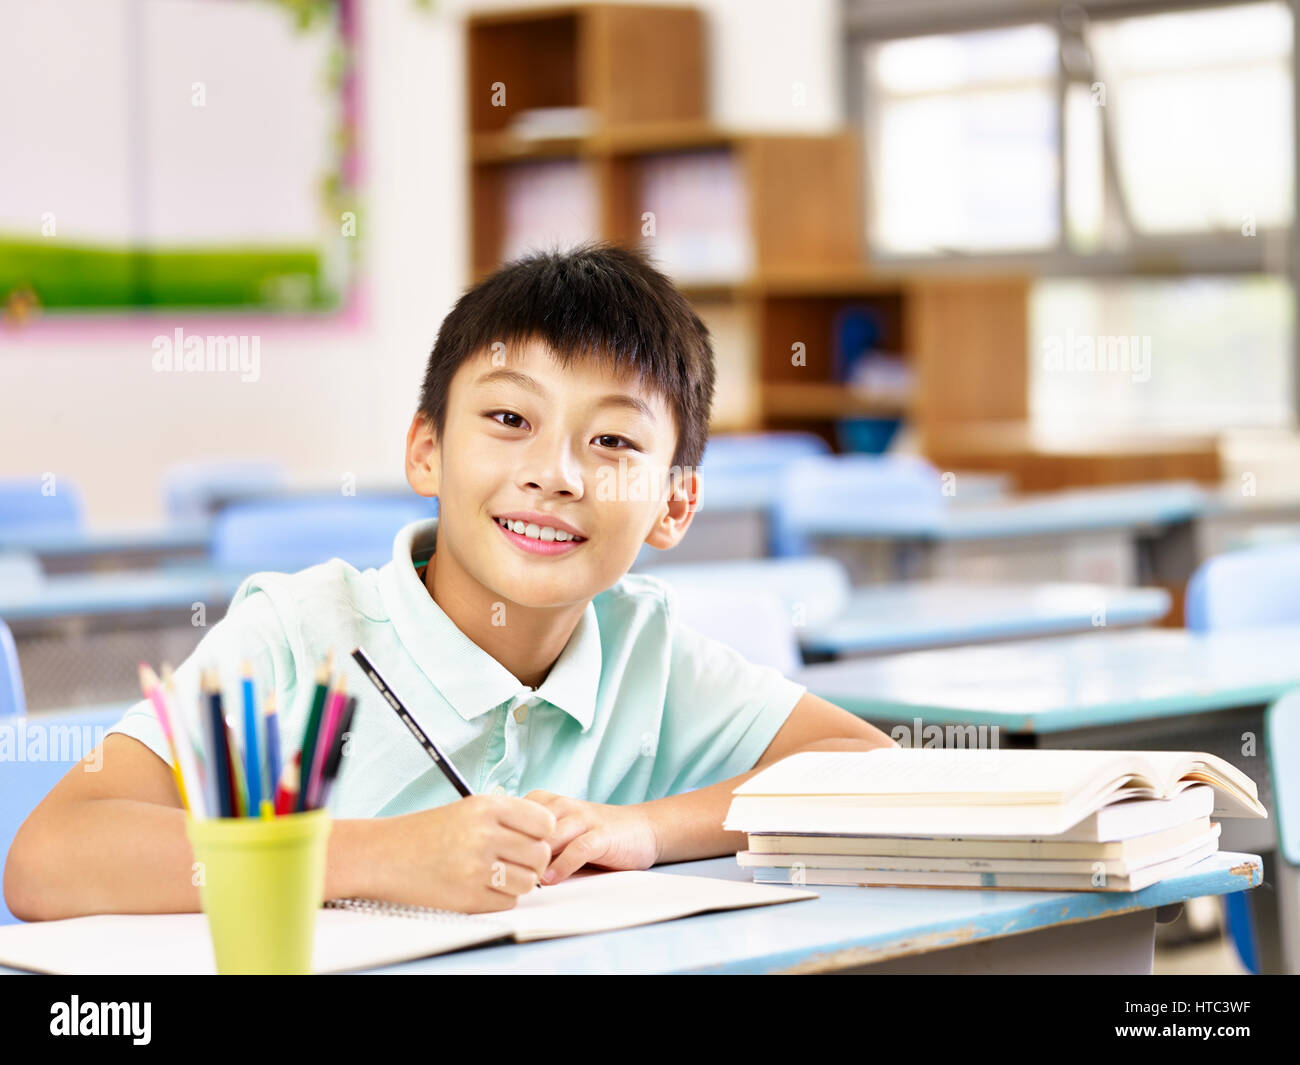 happy asian elementary school boy studying in classroom, looking at camera smiling. Stock Photo